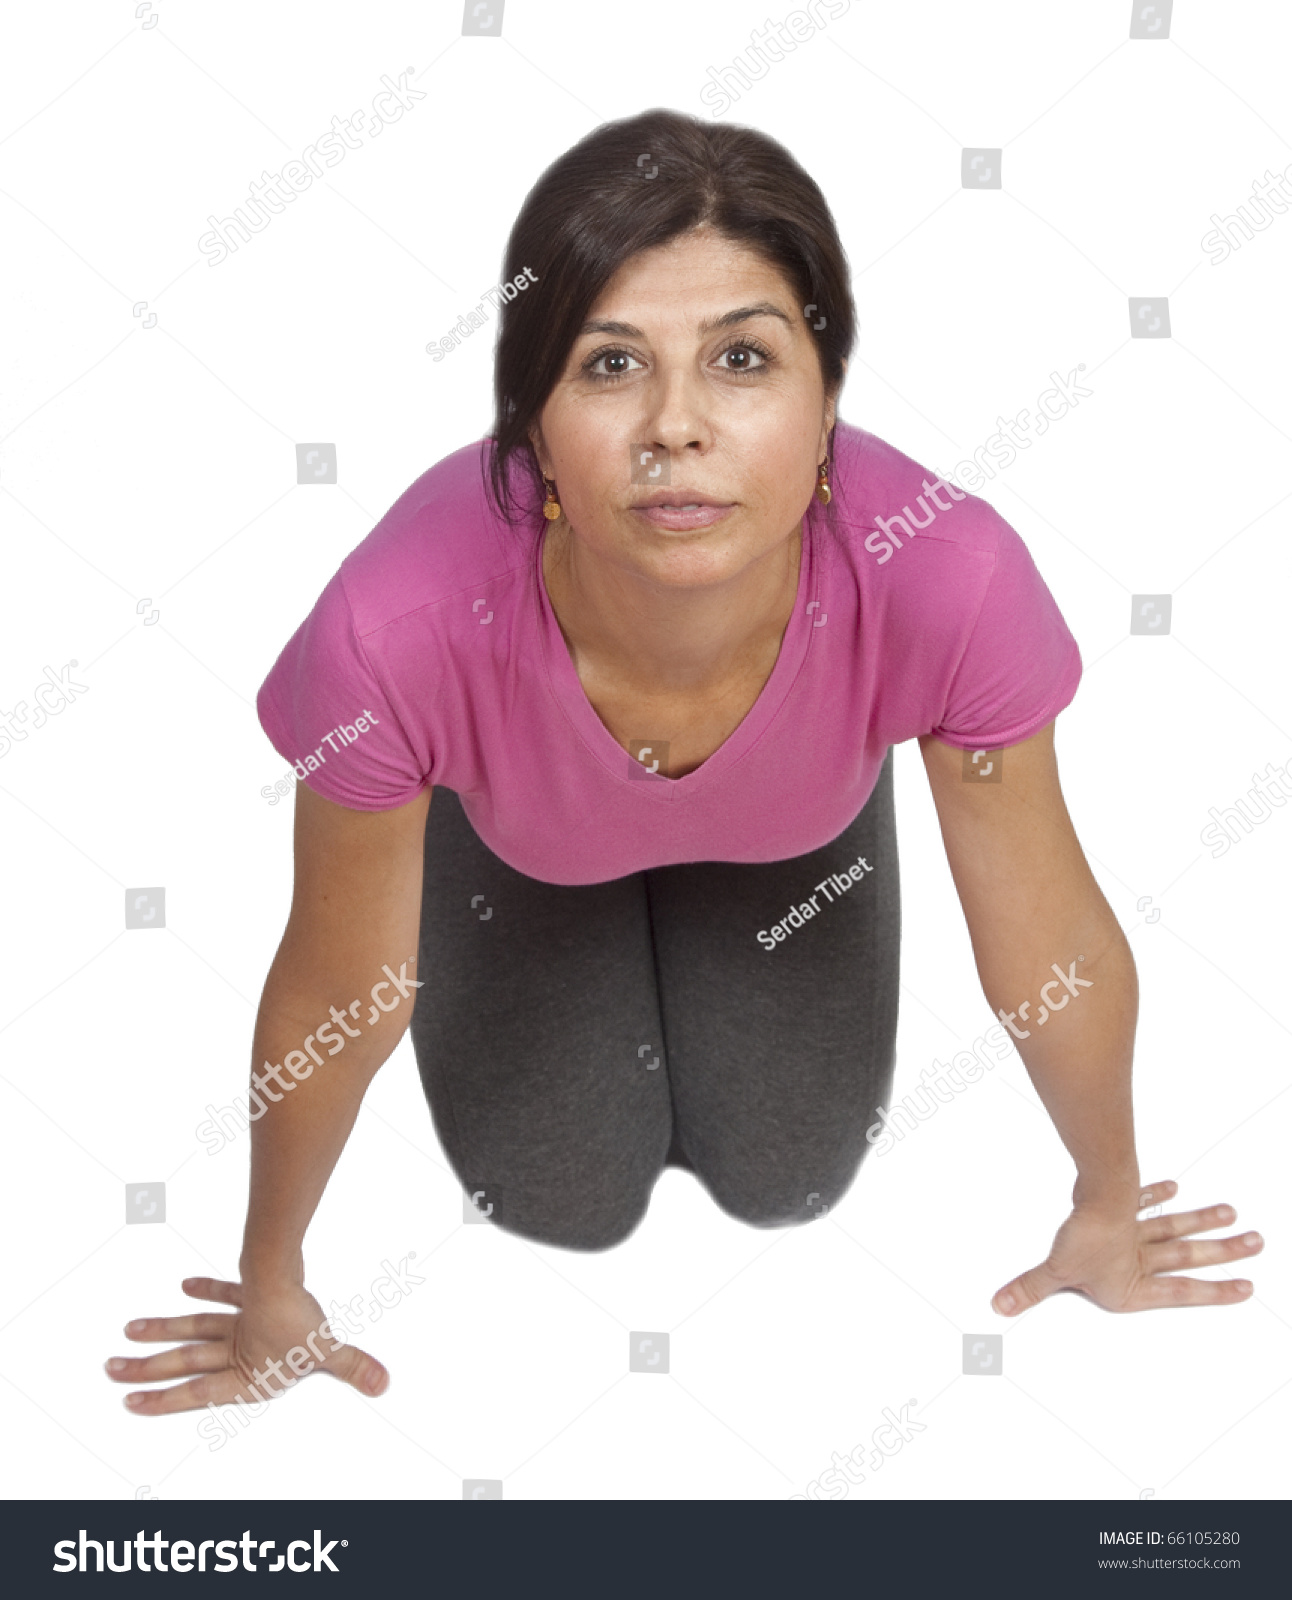 Woman Fitness Instructor On Her Knees Stock Photo (Royalty Free ...